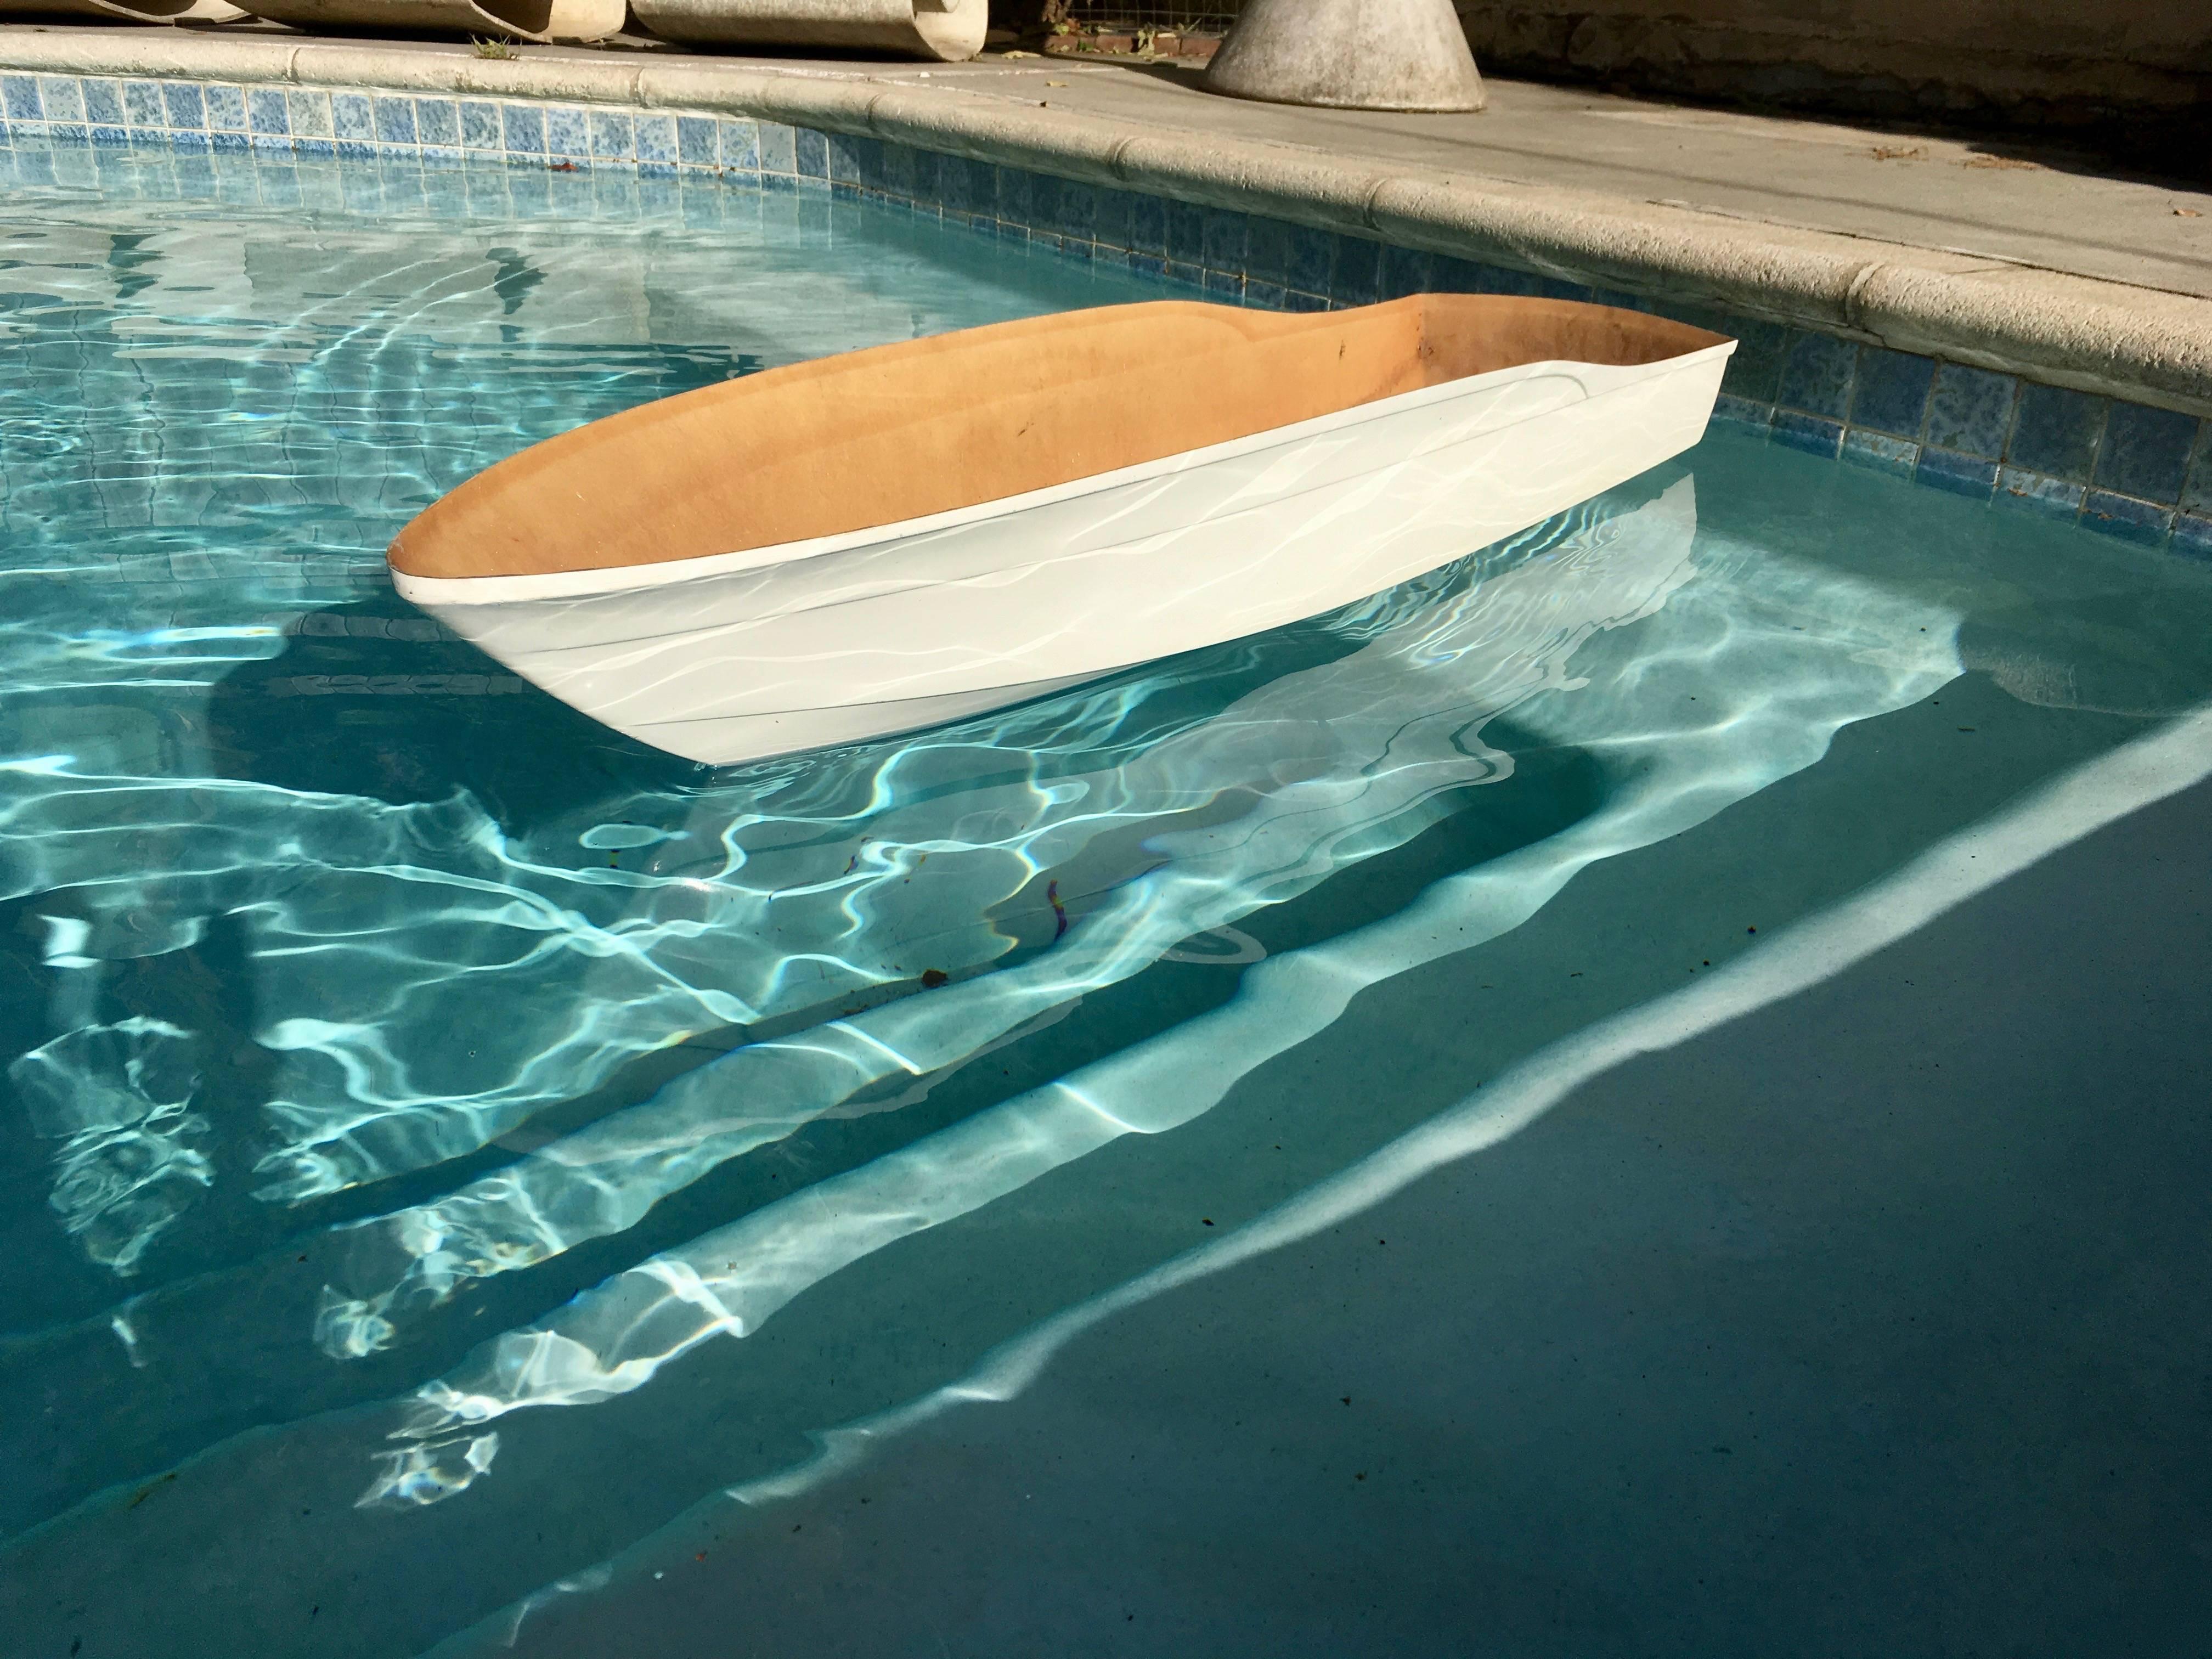 Large white fiberglass boat. Great sculptural object. Perfect art for the pool. Use in the pool to hold ice/drinks or as a floating planter. Very unique piece.